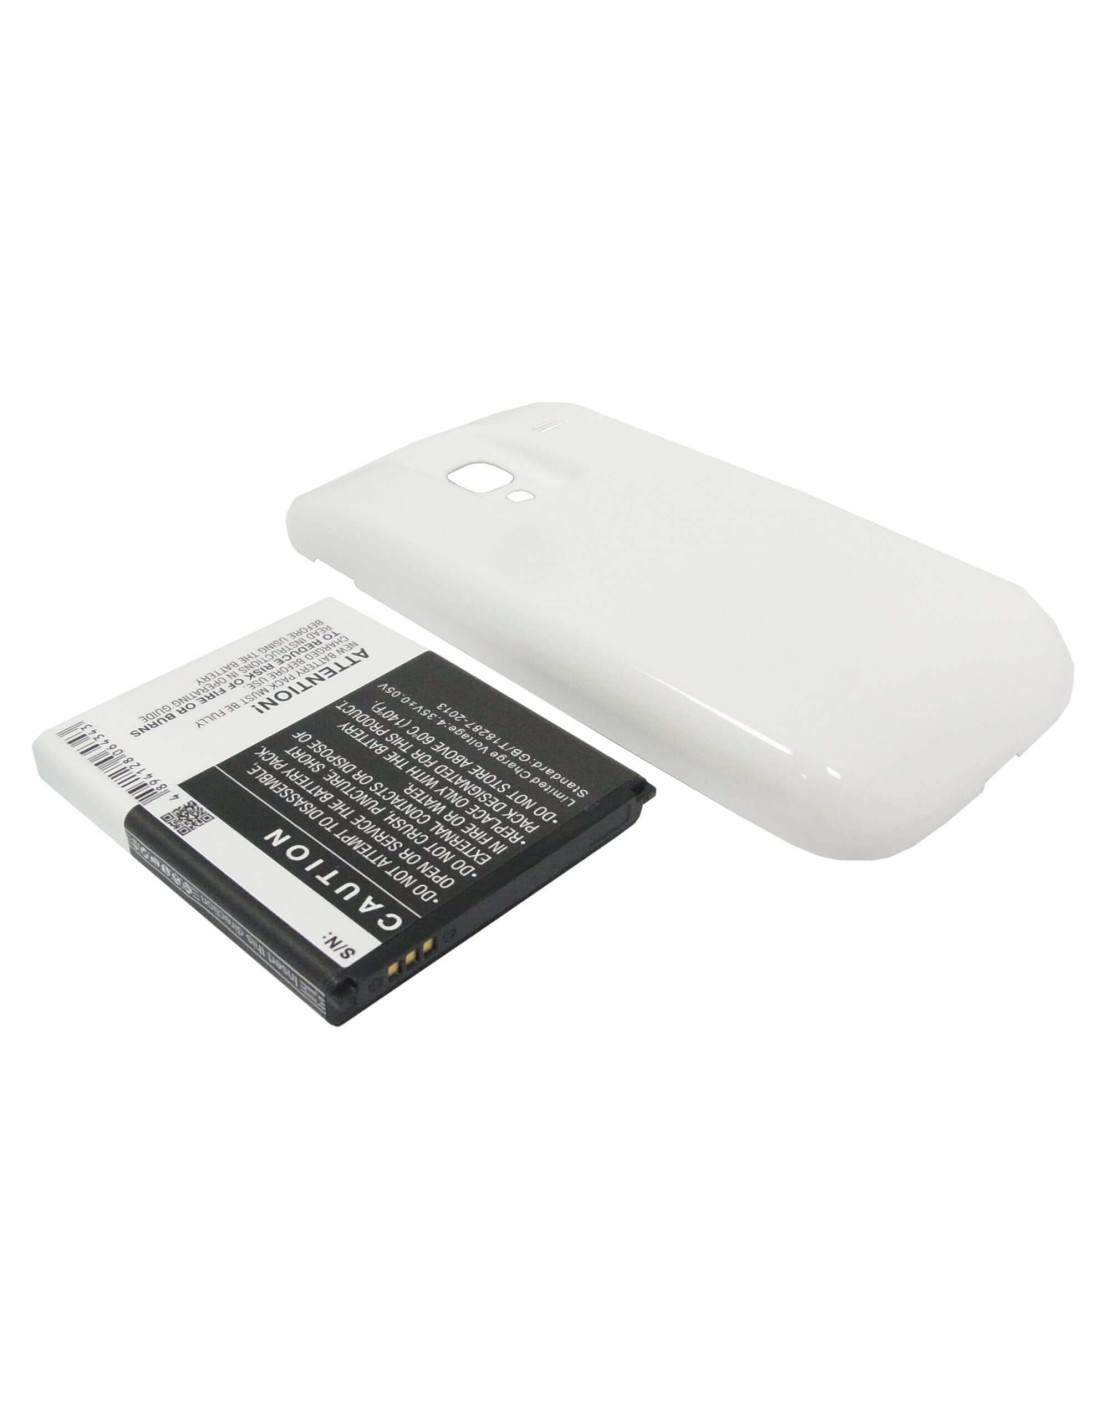 Battery for Samsung Galaxy Ace 2, GT-I8160, GT-I8160P, with white back cover 3.8V, 3500mAh - 13.30Wh